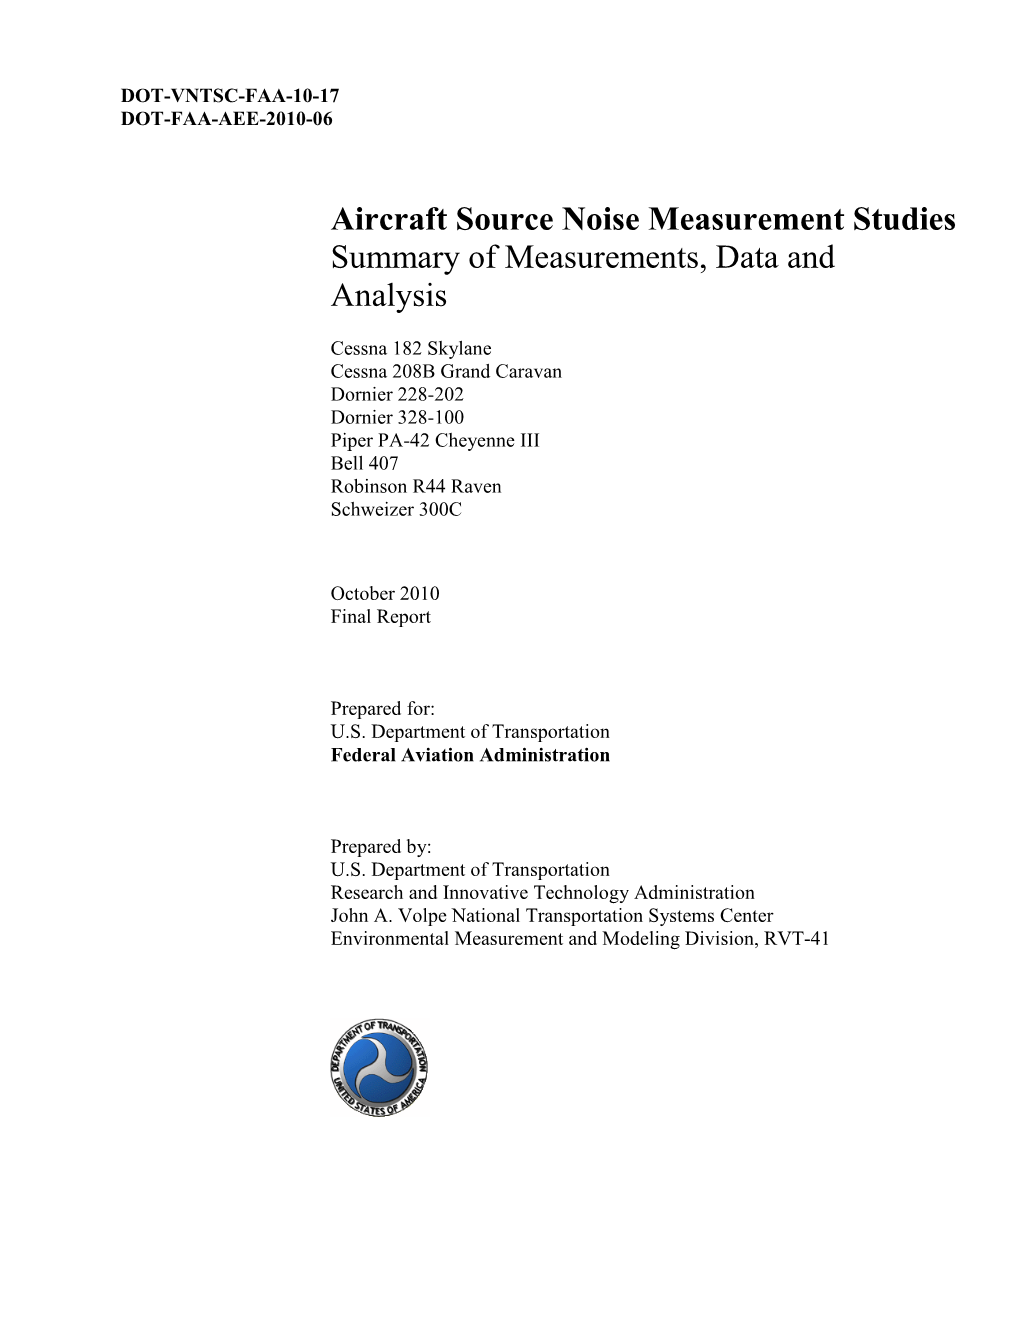 Aircraft Source Noise Measurement Studies Summary of Measurements, Data and Analysis